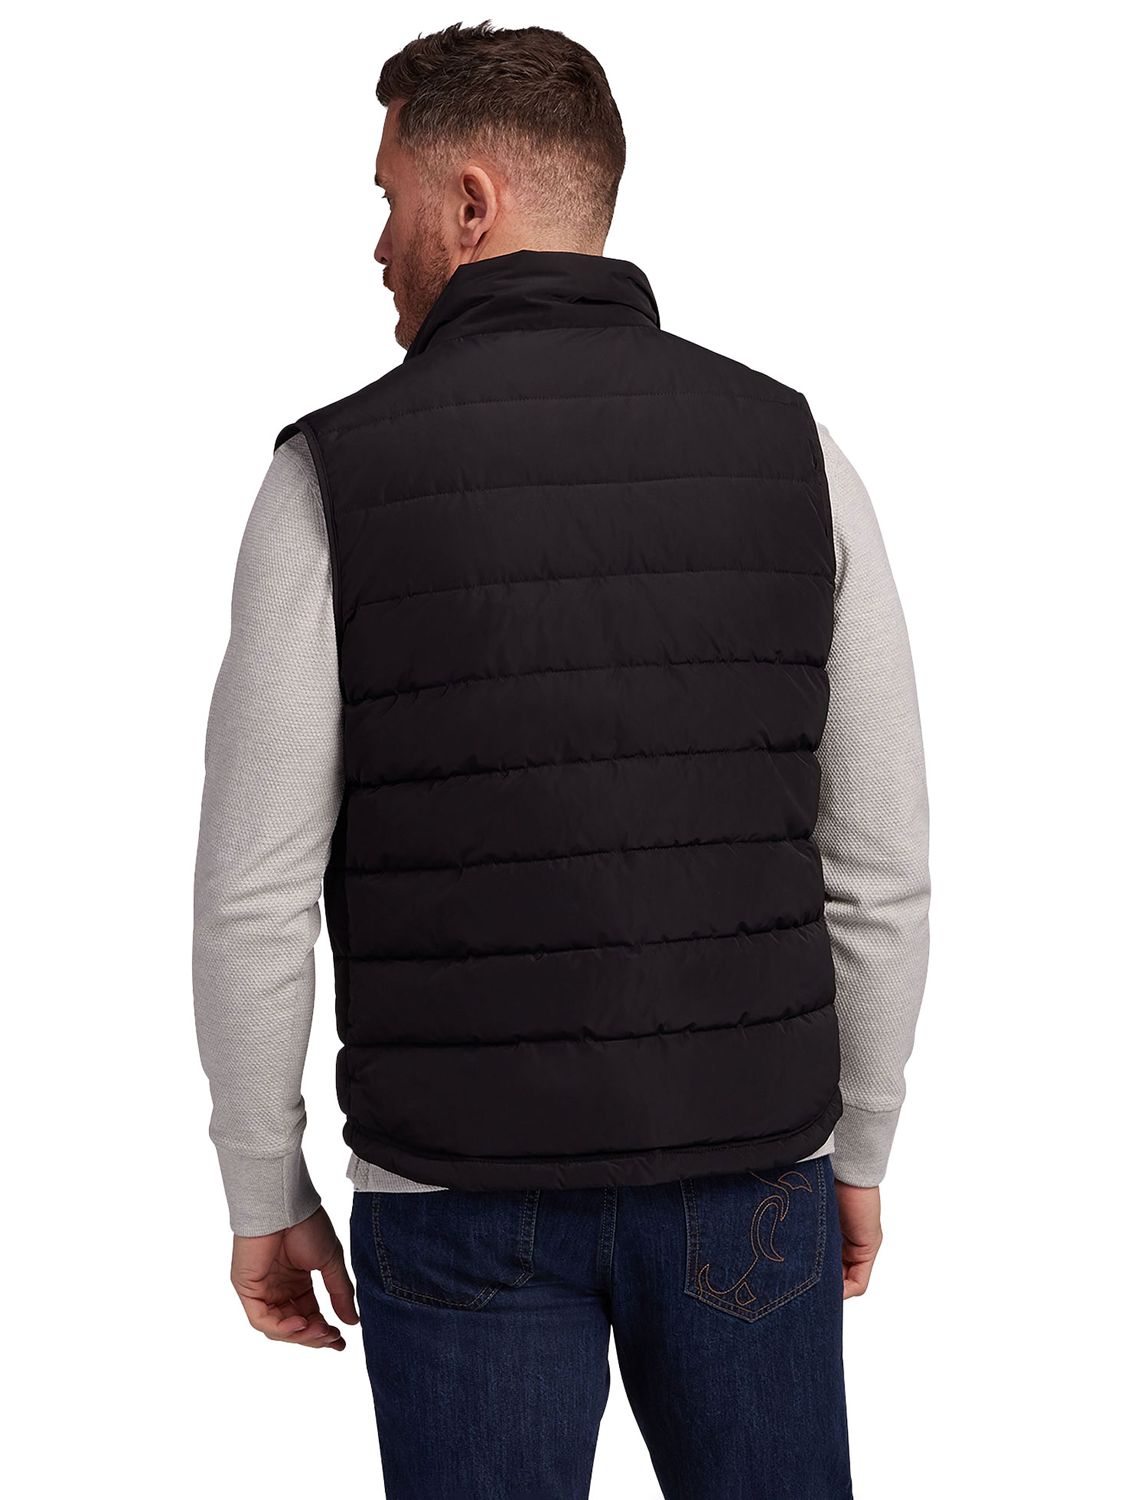 Raging Bull Midweight Quilted Gilet, Black at John Lewis & Partners